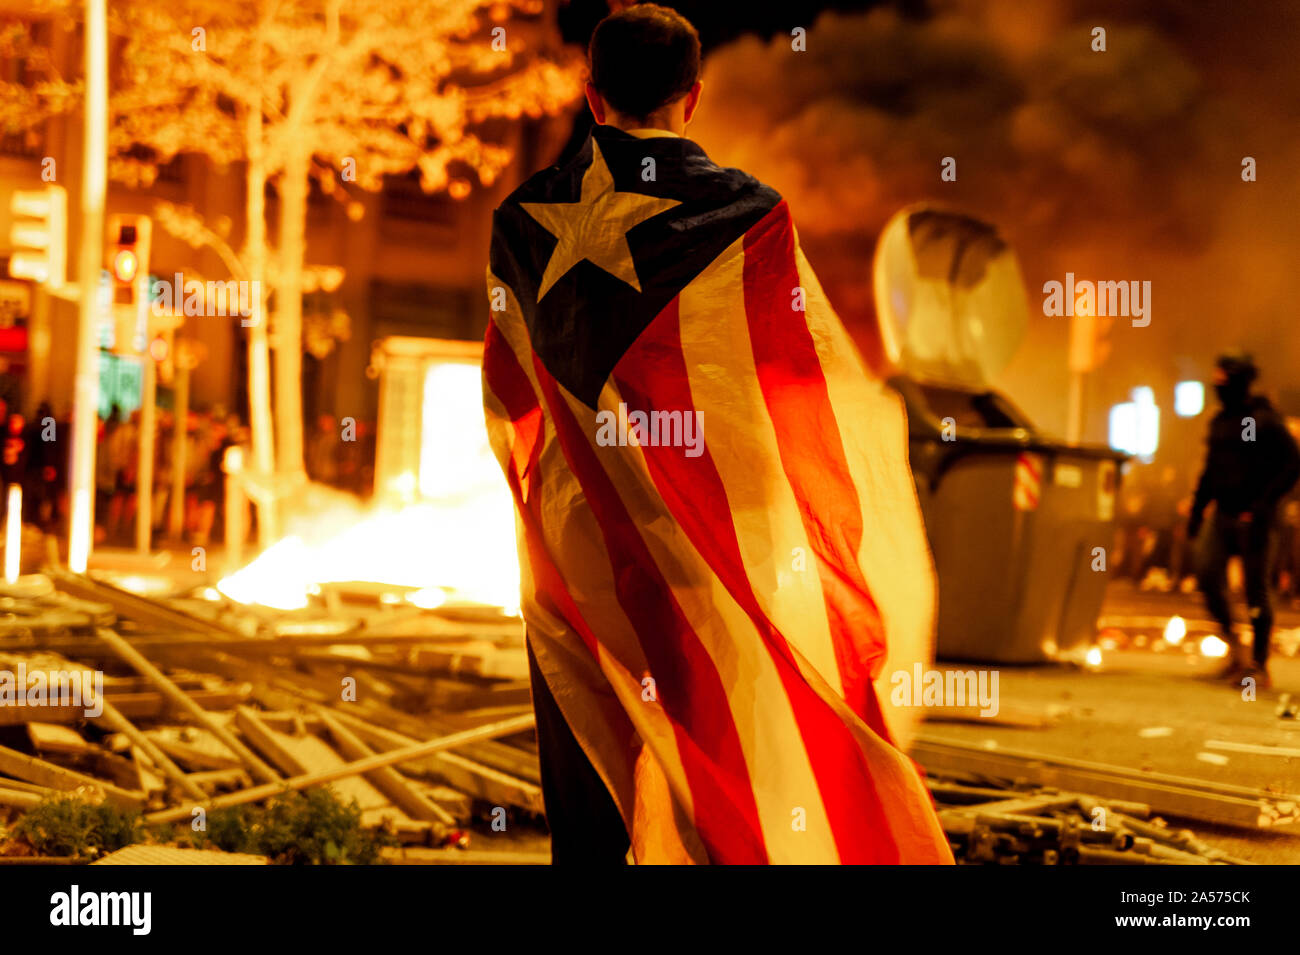 Barcelona, Spain - 18 october 2019: catalan activist with catalan flag at night with fire and destruction in background during clashes with police Stock Photo